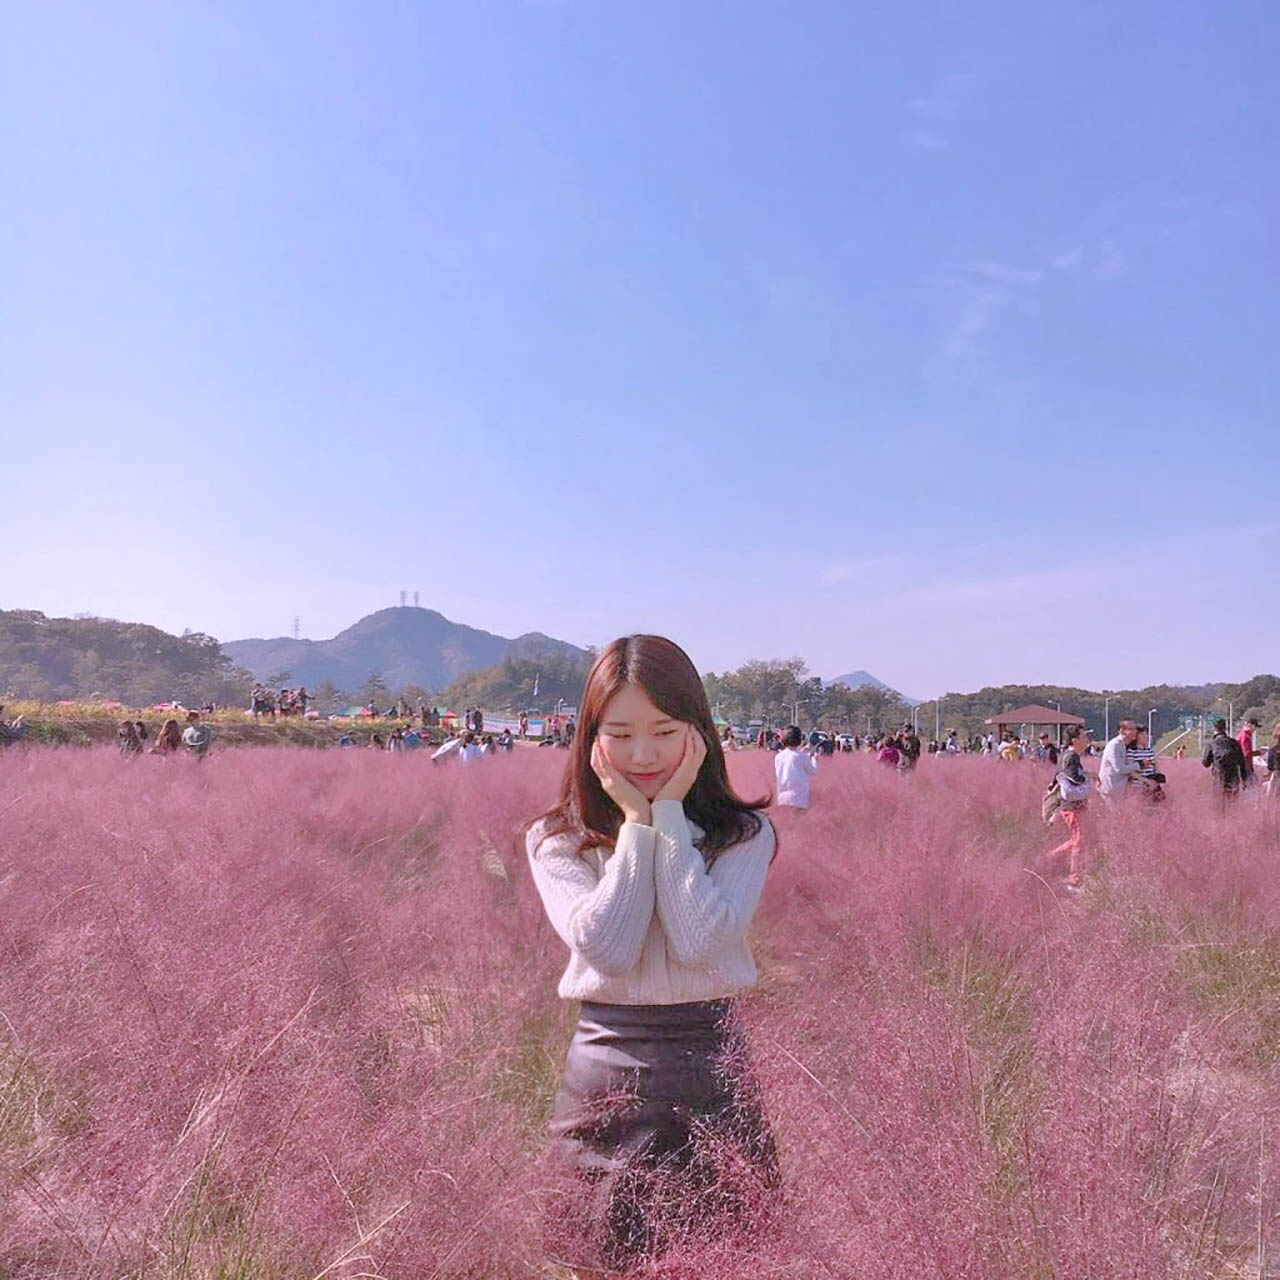 Seoul's Best Pink Muhly Spots in Autumn